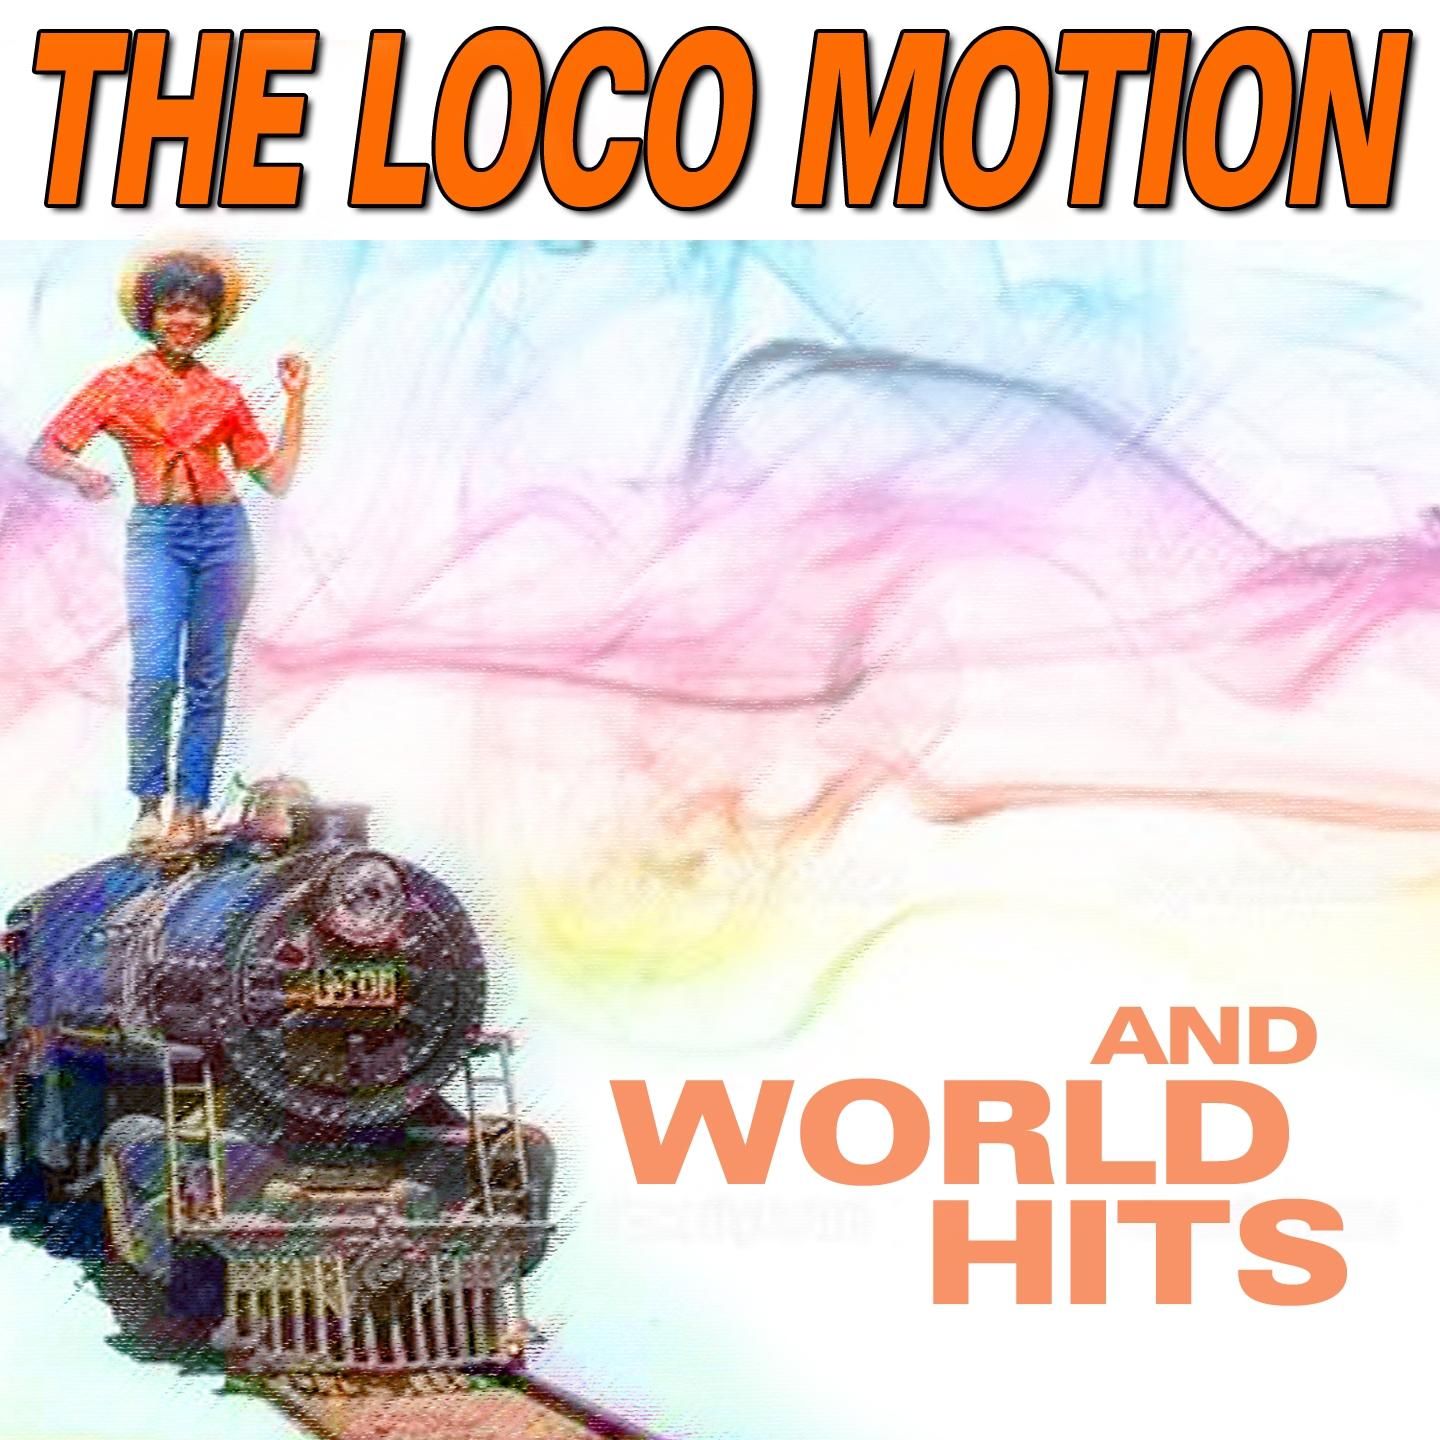 The Loco Motion and World Hits (Hits That Going Round the World)